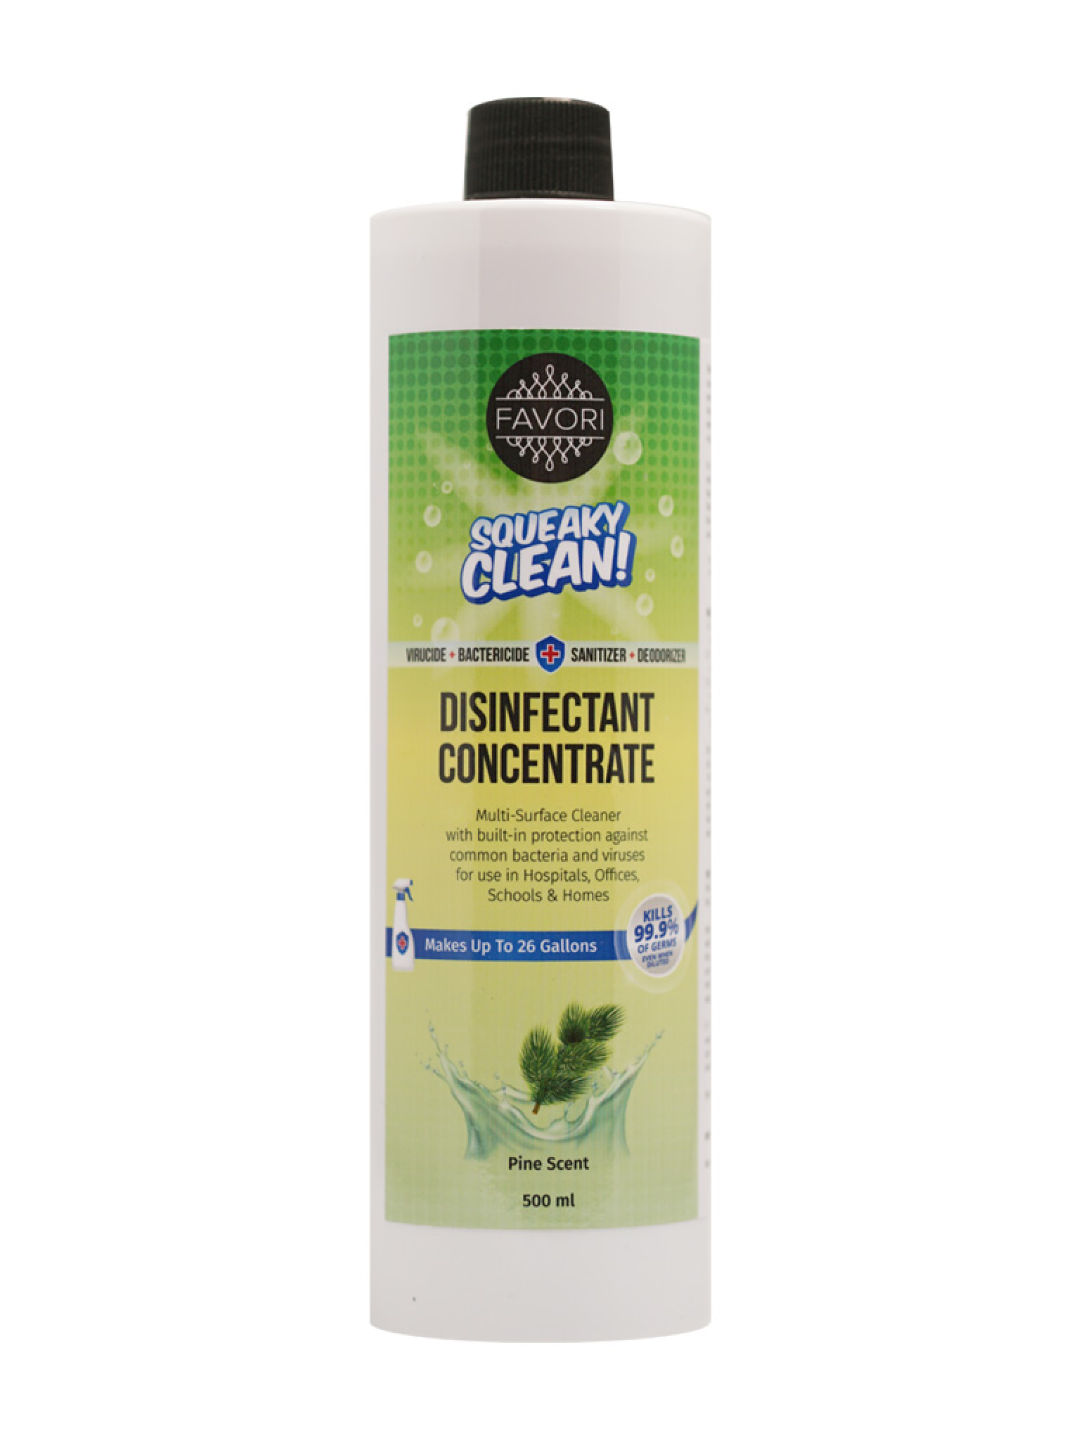 FAVORI Squeaky Clean Disinfectant Concentrate (500ml)